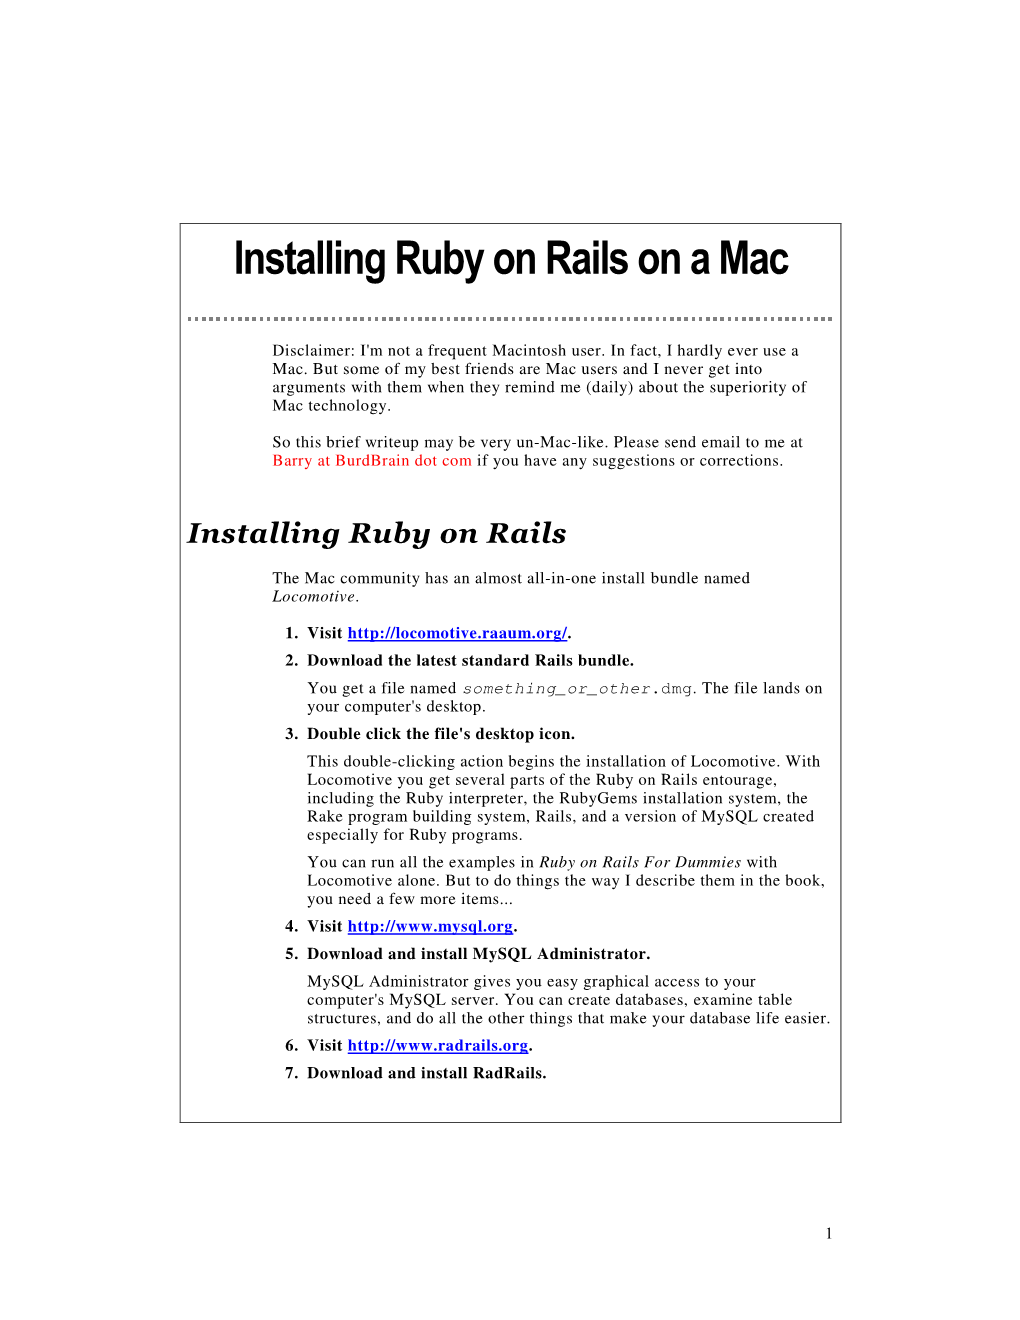 Instructions for Installing Ruby on Rails on A